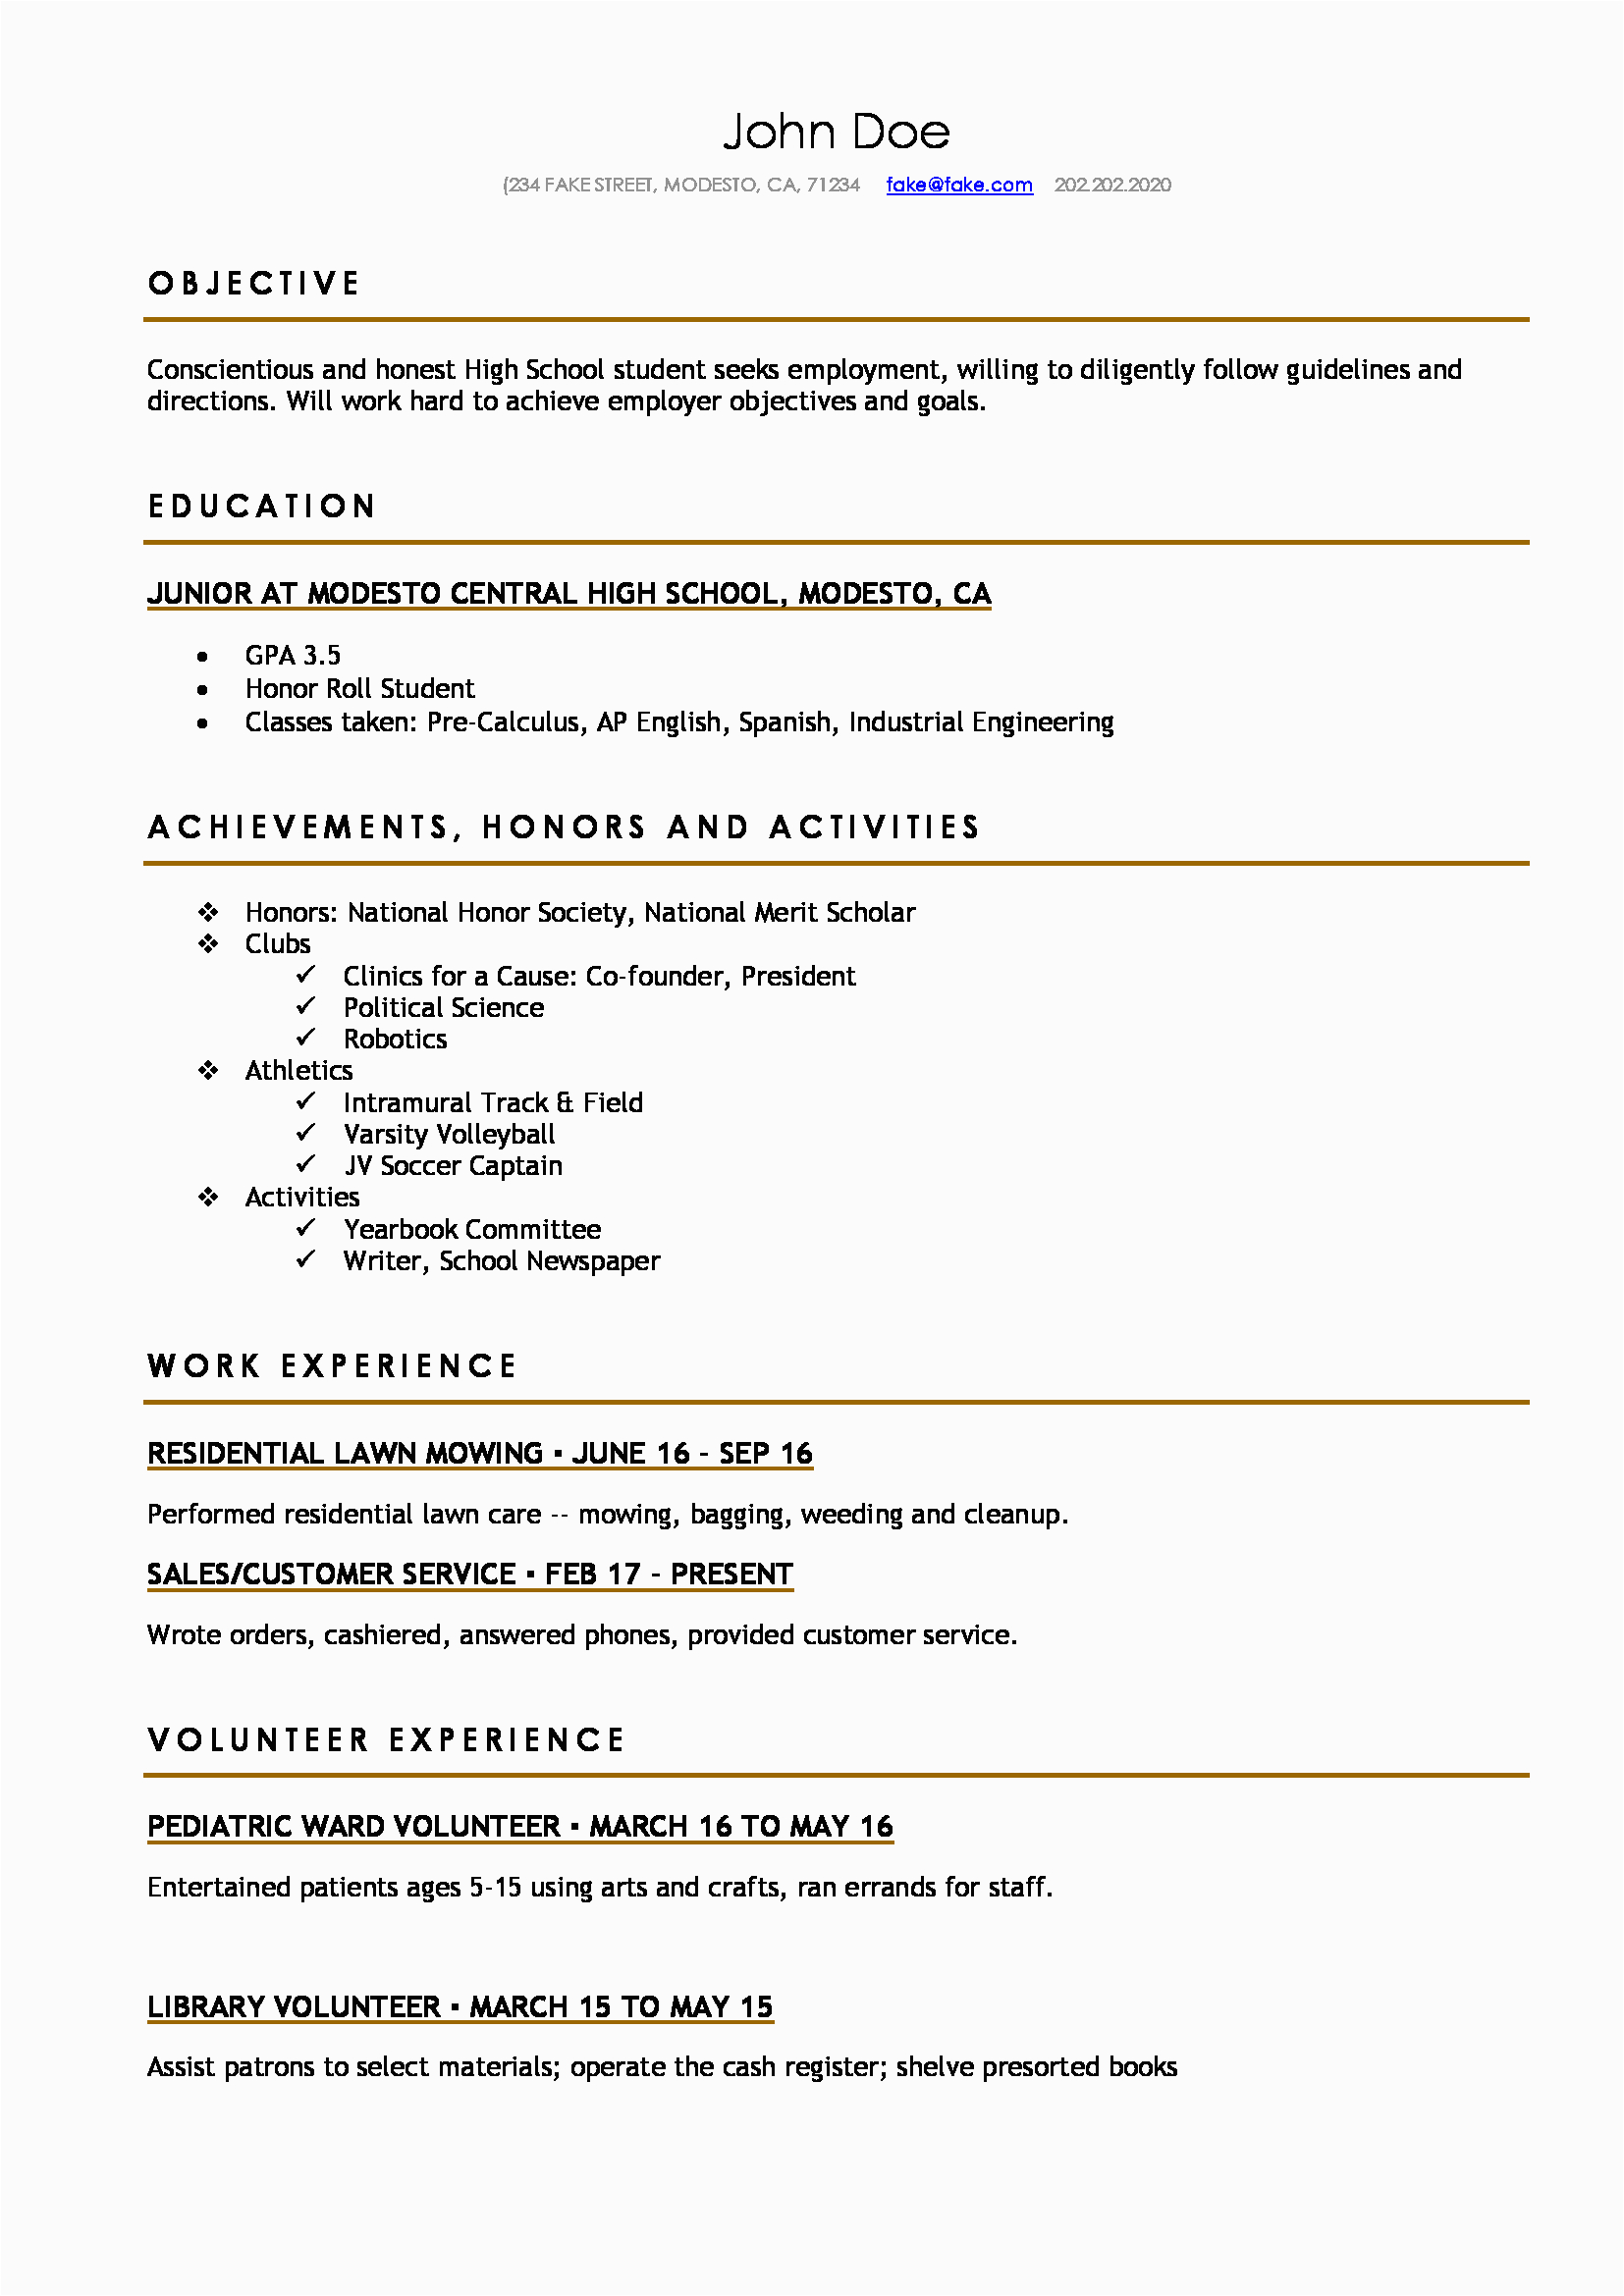 Resume Template for High School Student for College High School Resume Resumes Perfect for High School Students